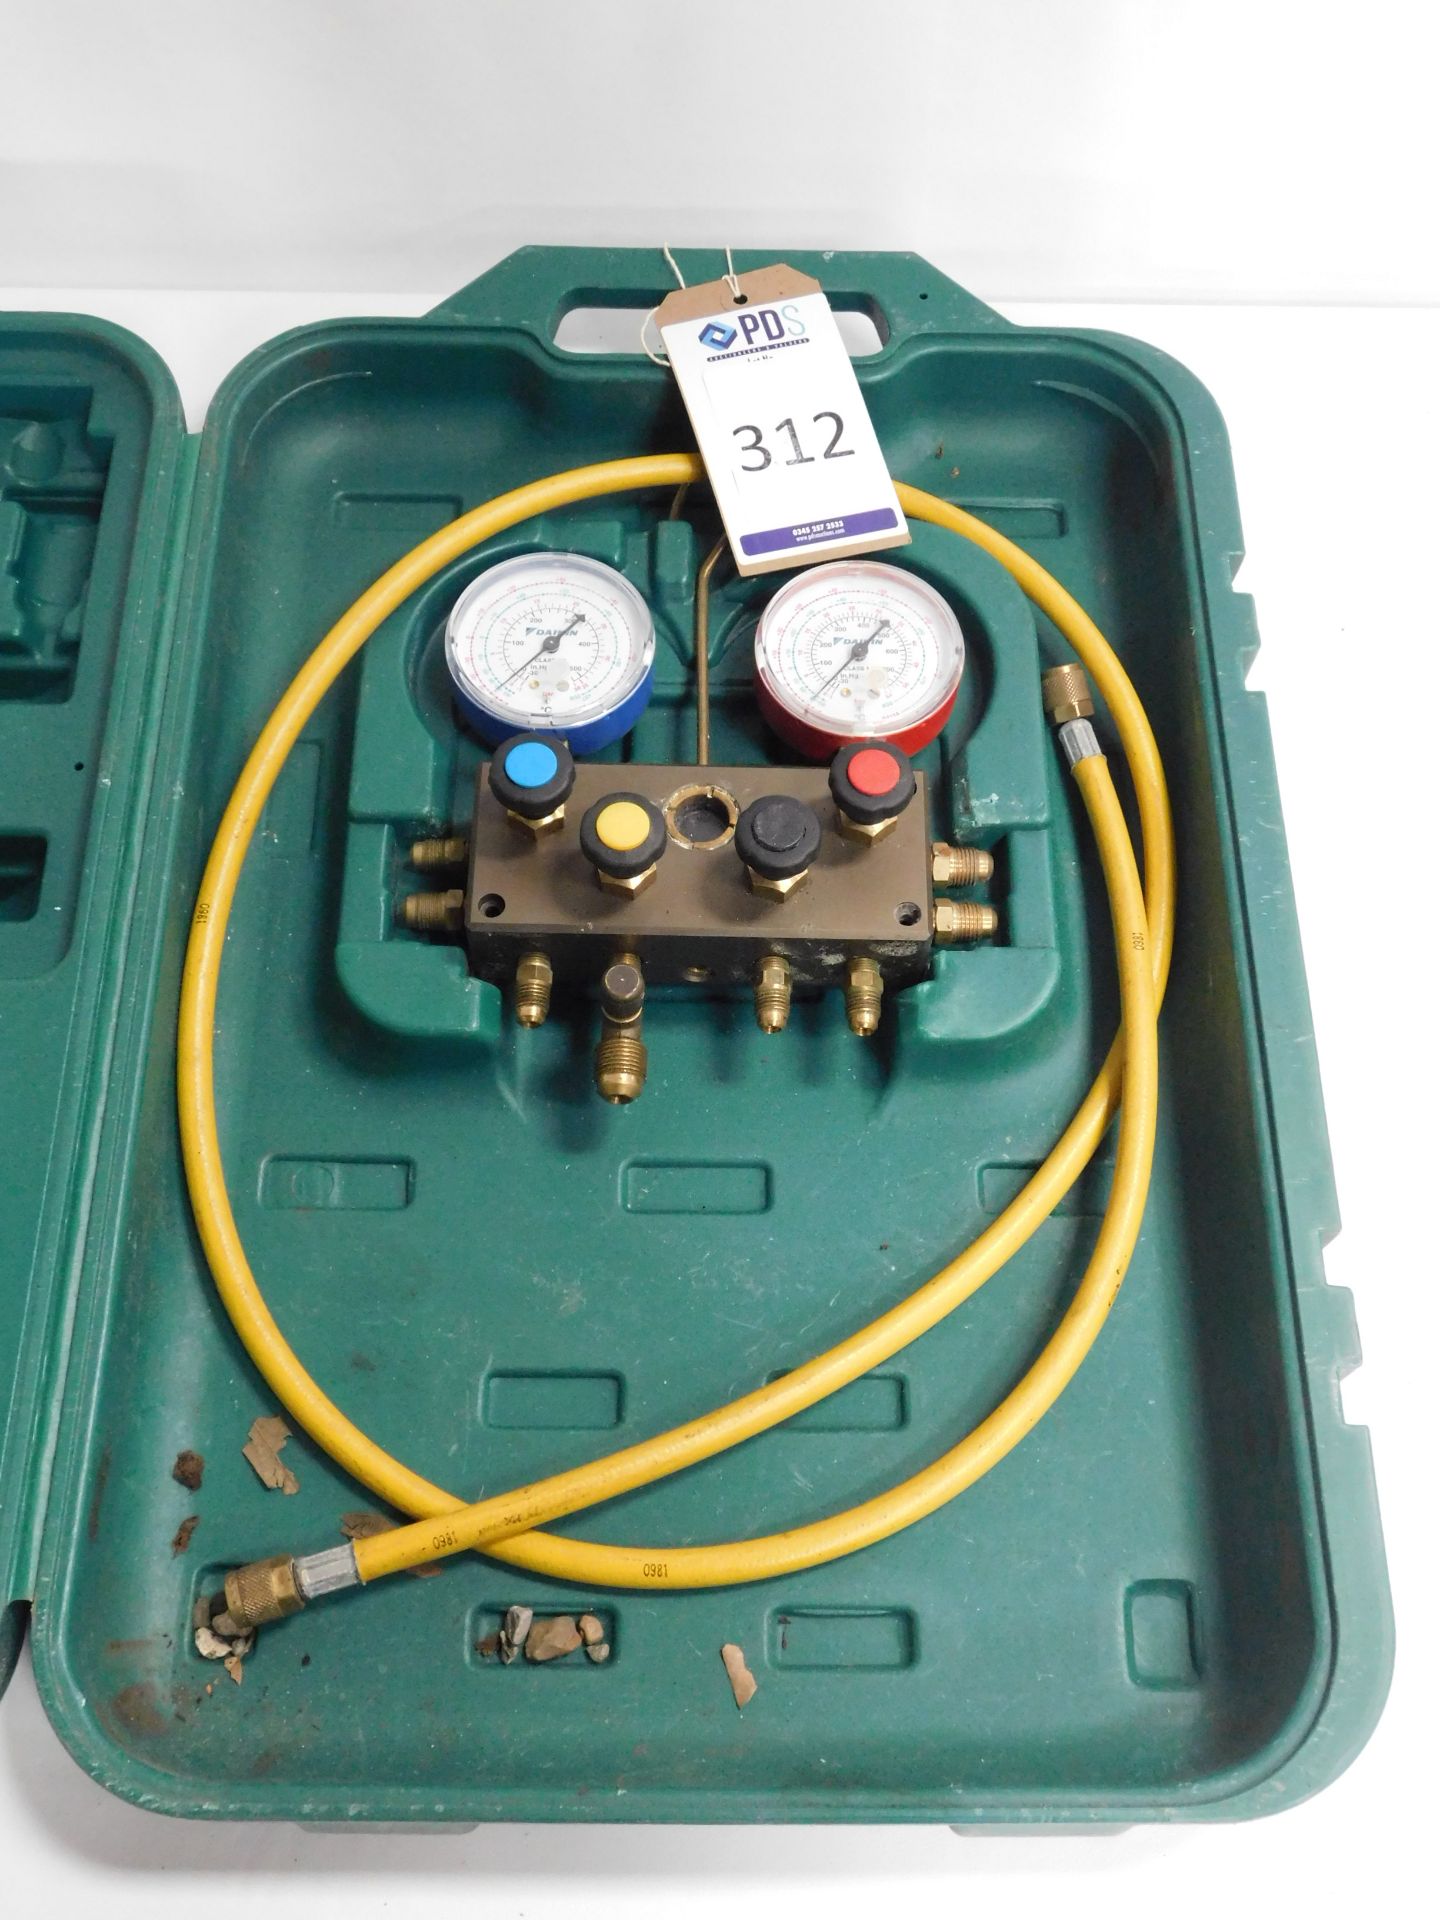 REFCO 4 Way Manifold Set Dual Scale Gauges (Missing Charging Lines) (Location Brentwood. Please - Image 2 of 4